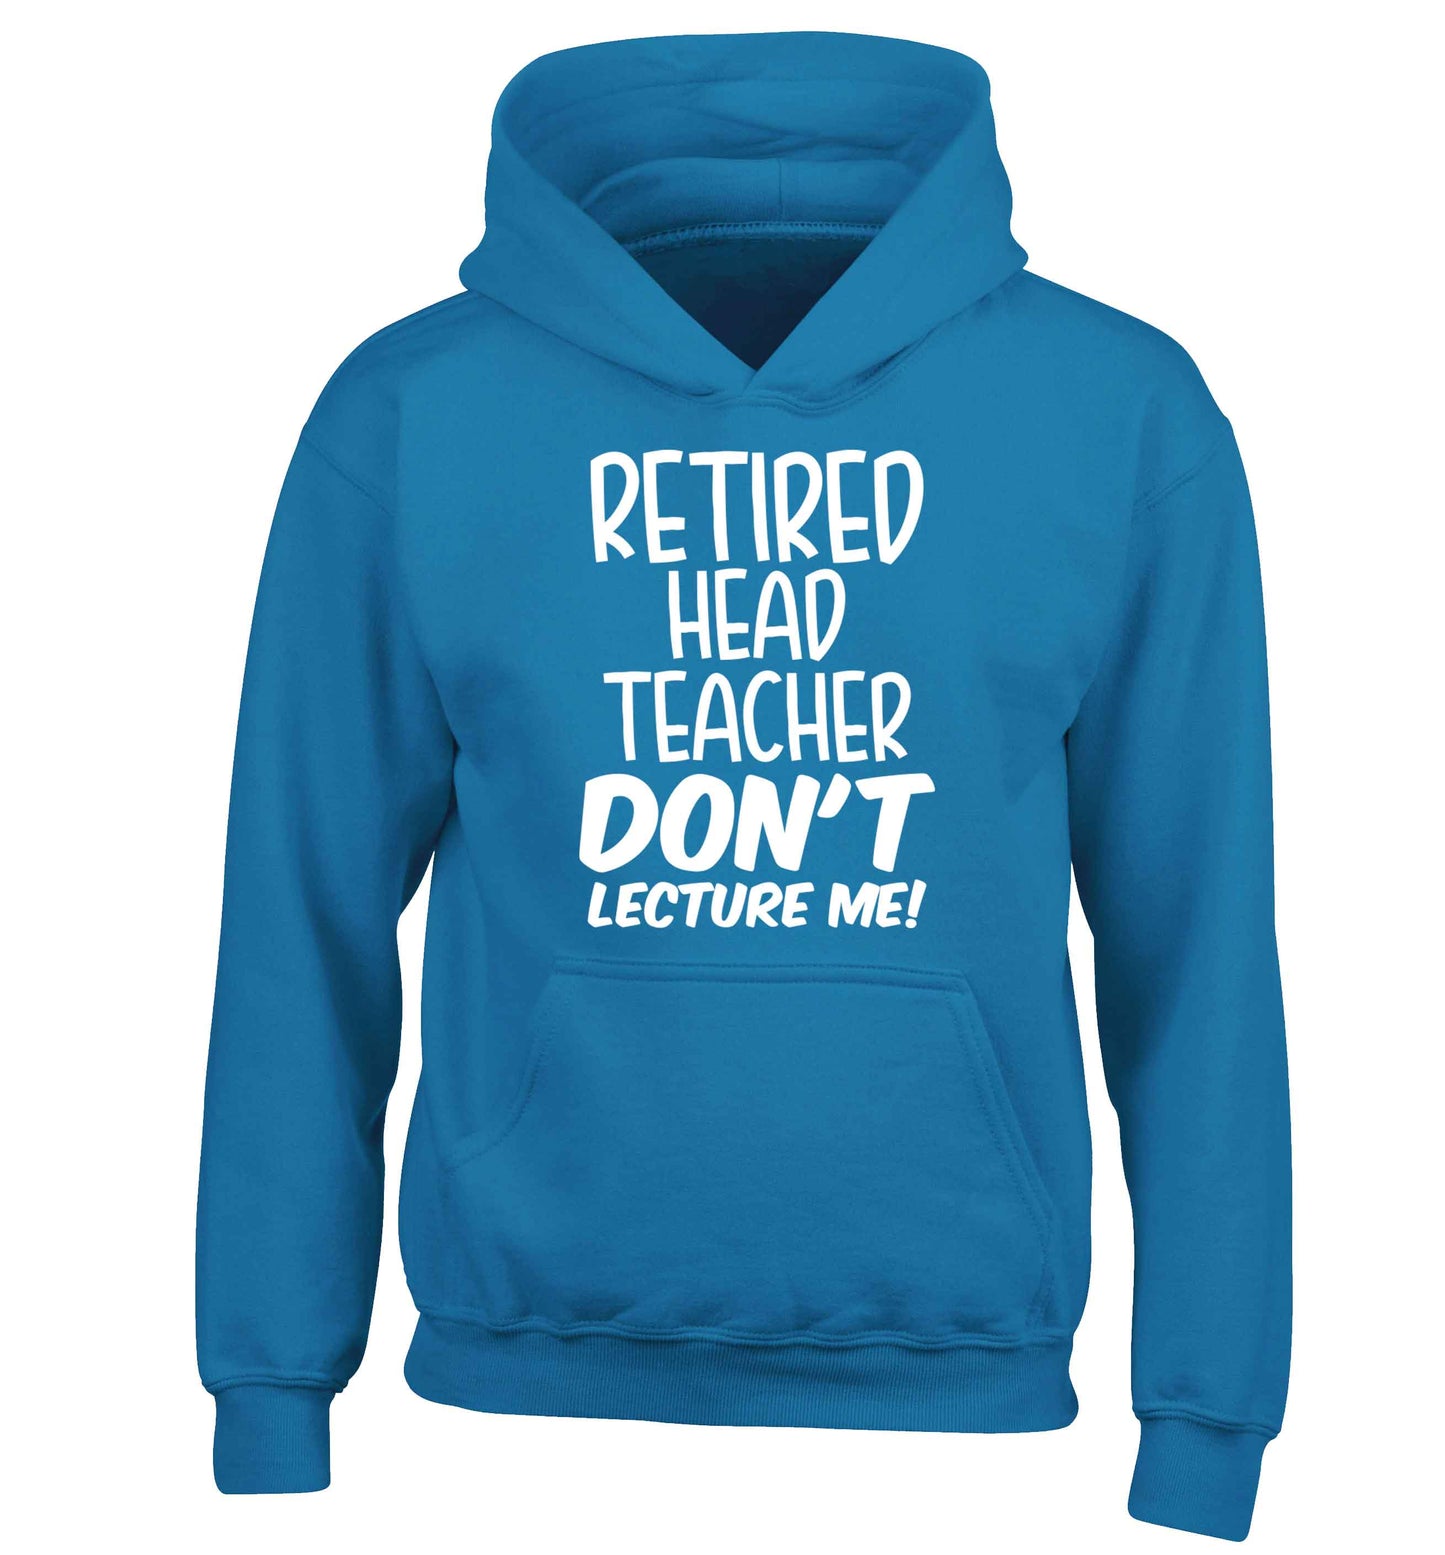 Retired head teacher don't lecture me! children's blue hoodie 12-13 Years